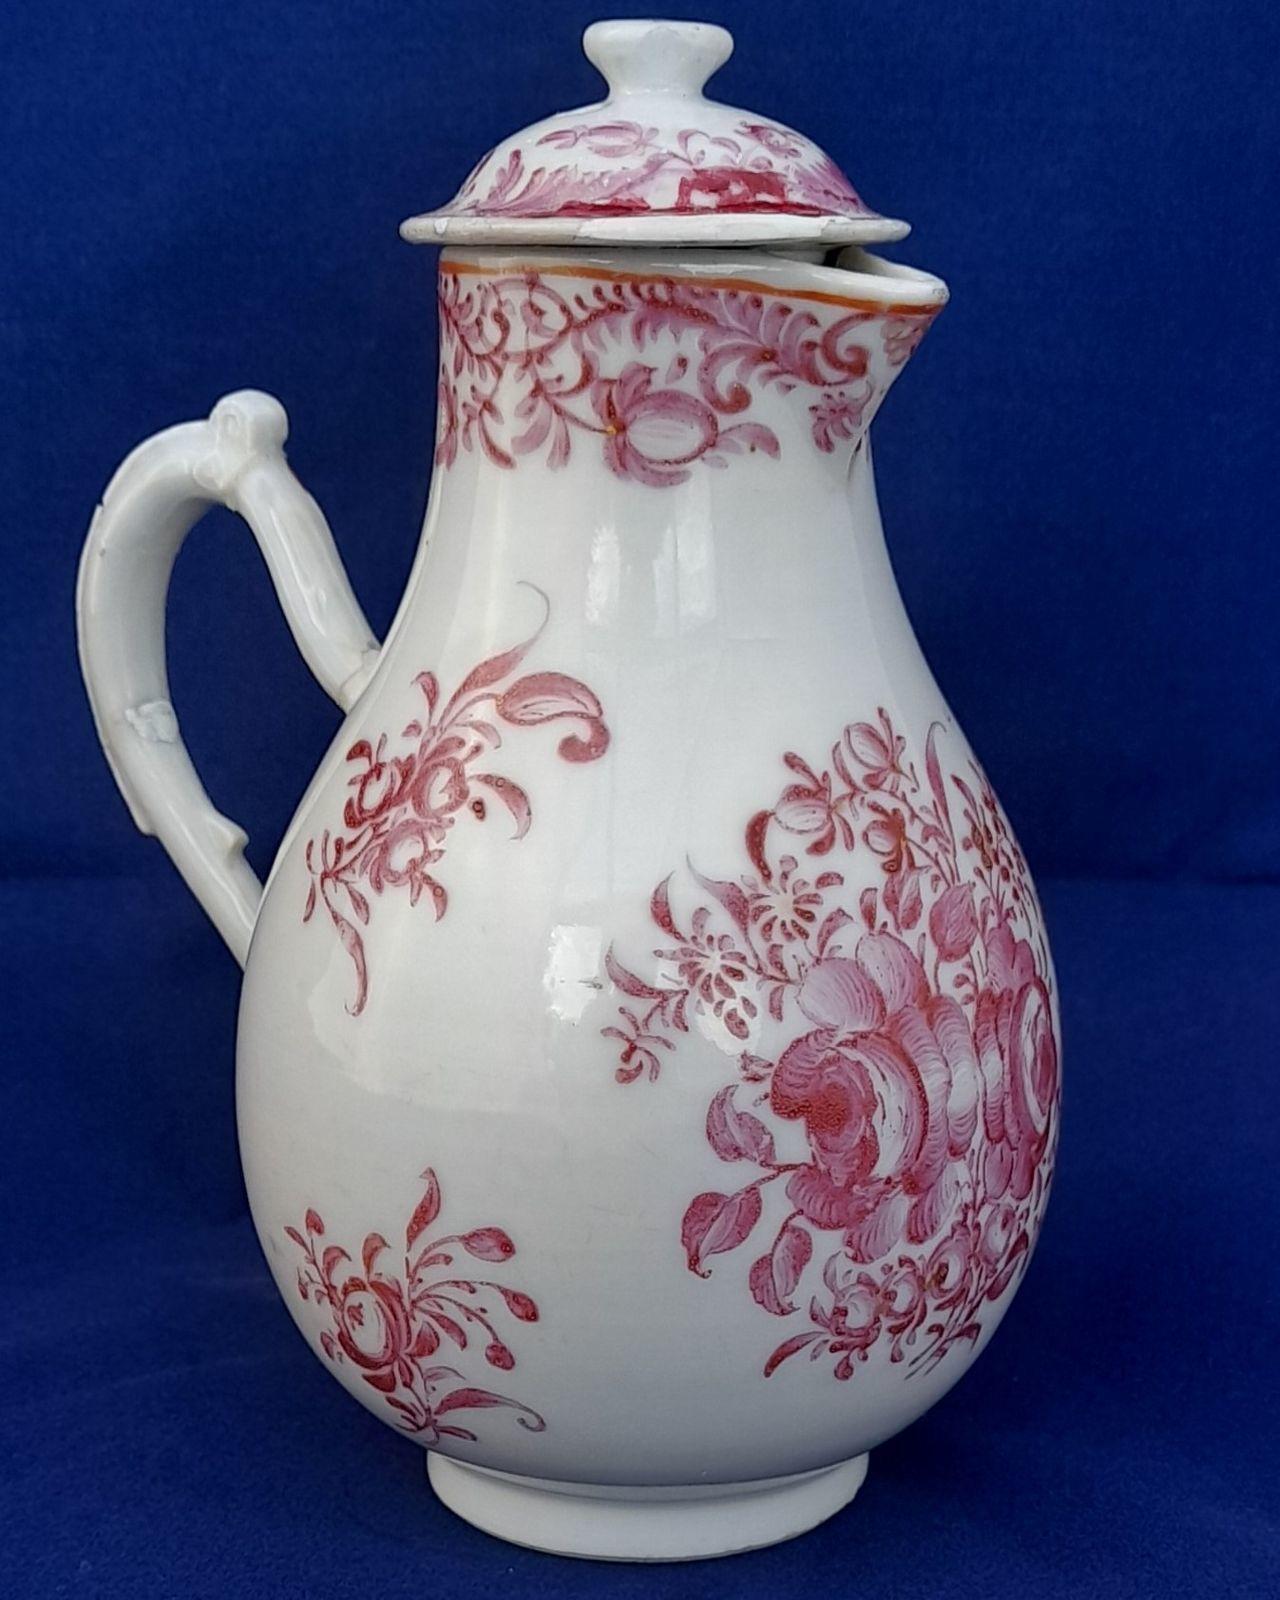 An antique Chinese porcelain lidded sparrow beak milk jug or creamer hand painted in puce with a floral pattern made in theperiod of the Chinese Emperor Qianlong in the Qing dynasty  circa 1760